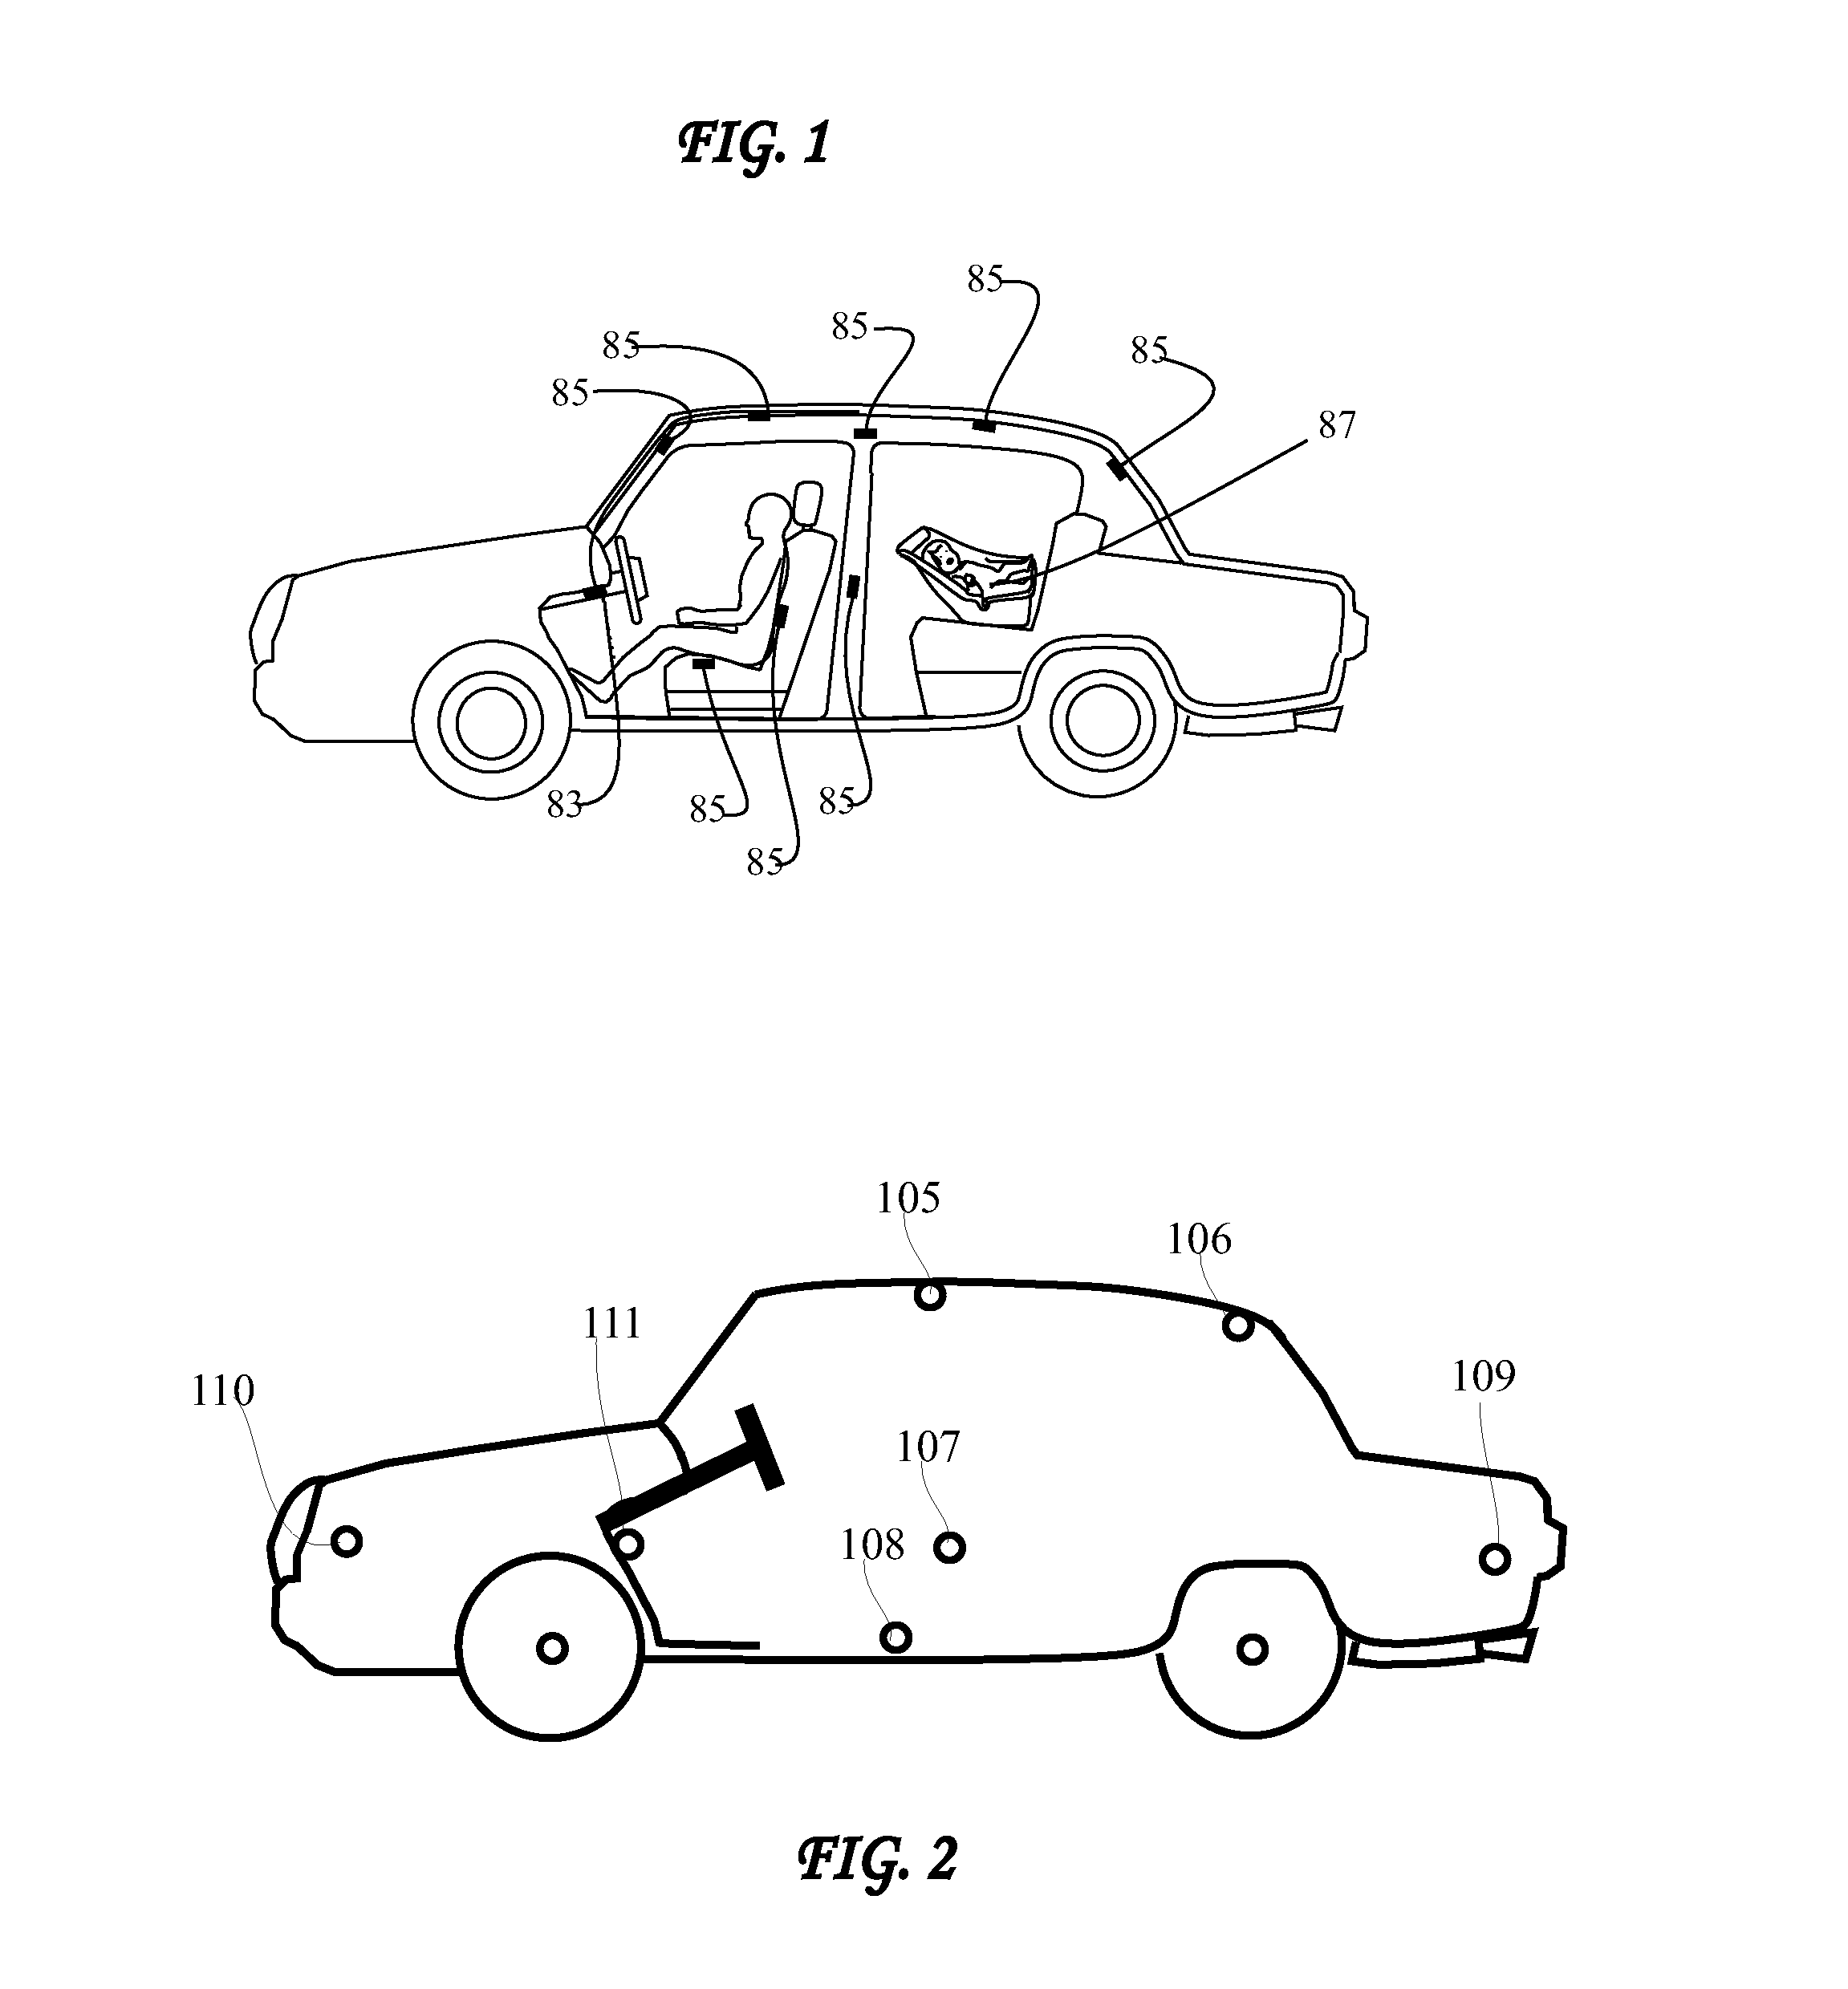 Method and System for Notifying a Remote Facility of an Accident Involving a Vehicle